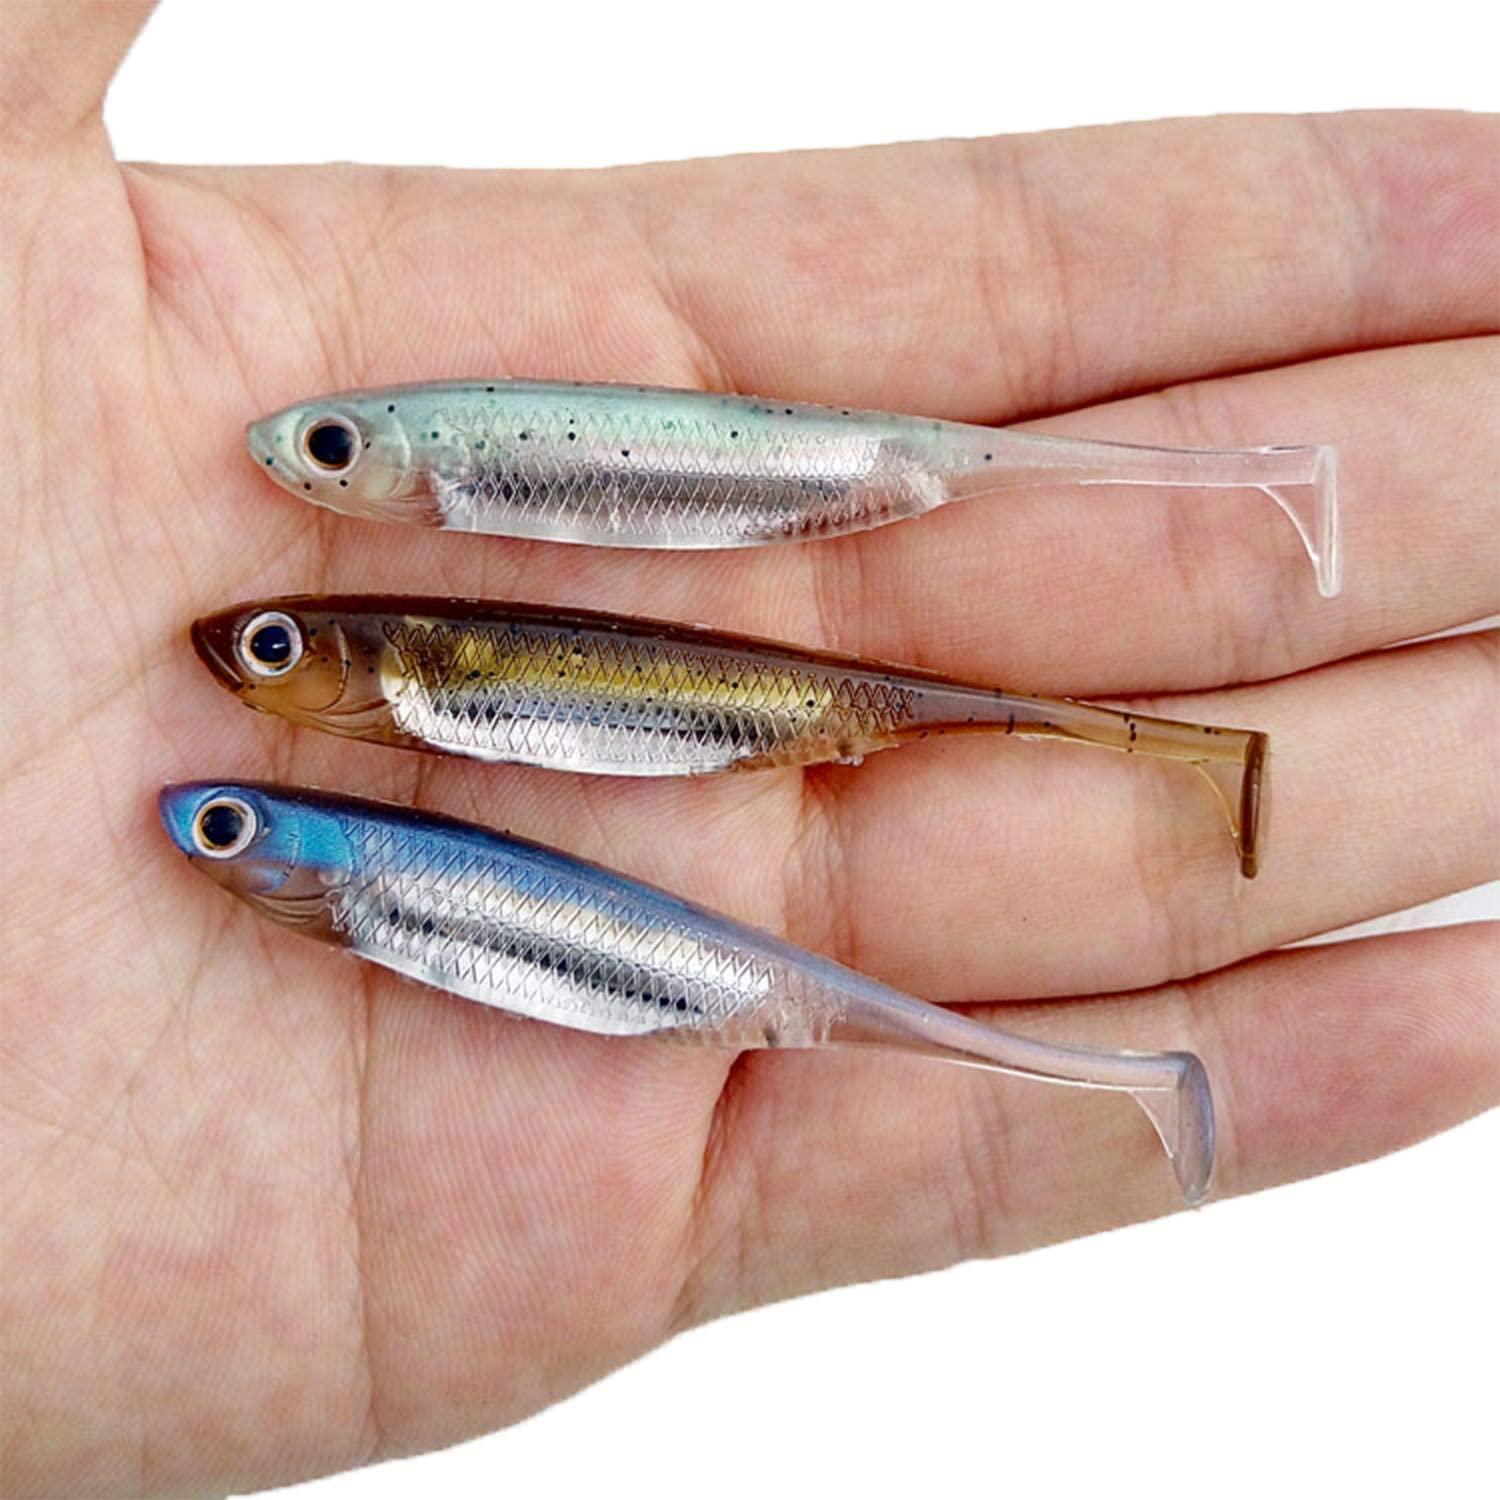 QualyQualy Soft Plastic Swimbait Paddle Tail Shad Lure Soft Bass Shad Bait  Shad Minnow Paddle Tail Swim Bait for Bass Trout Walleye Crappie 2.75in  3.14in 3.94in 5in 1# 2.75in - 6Pcs